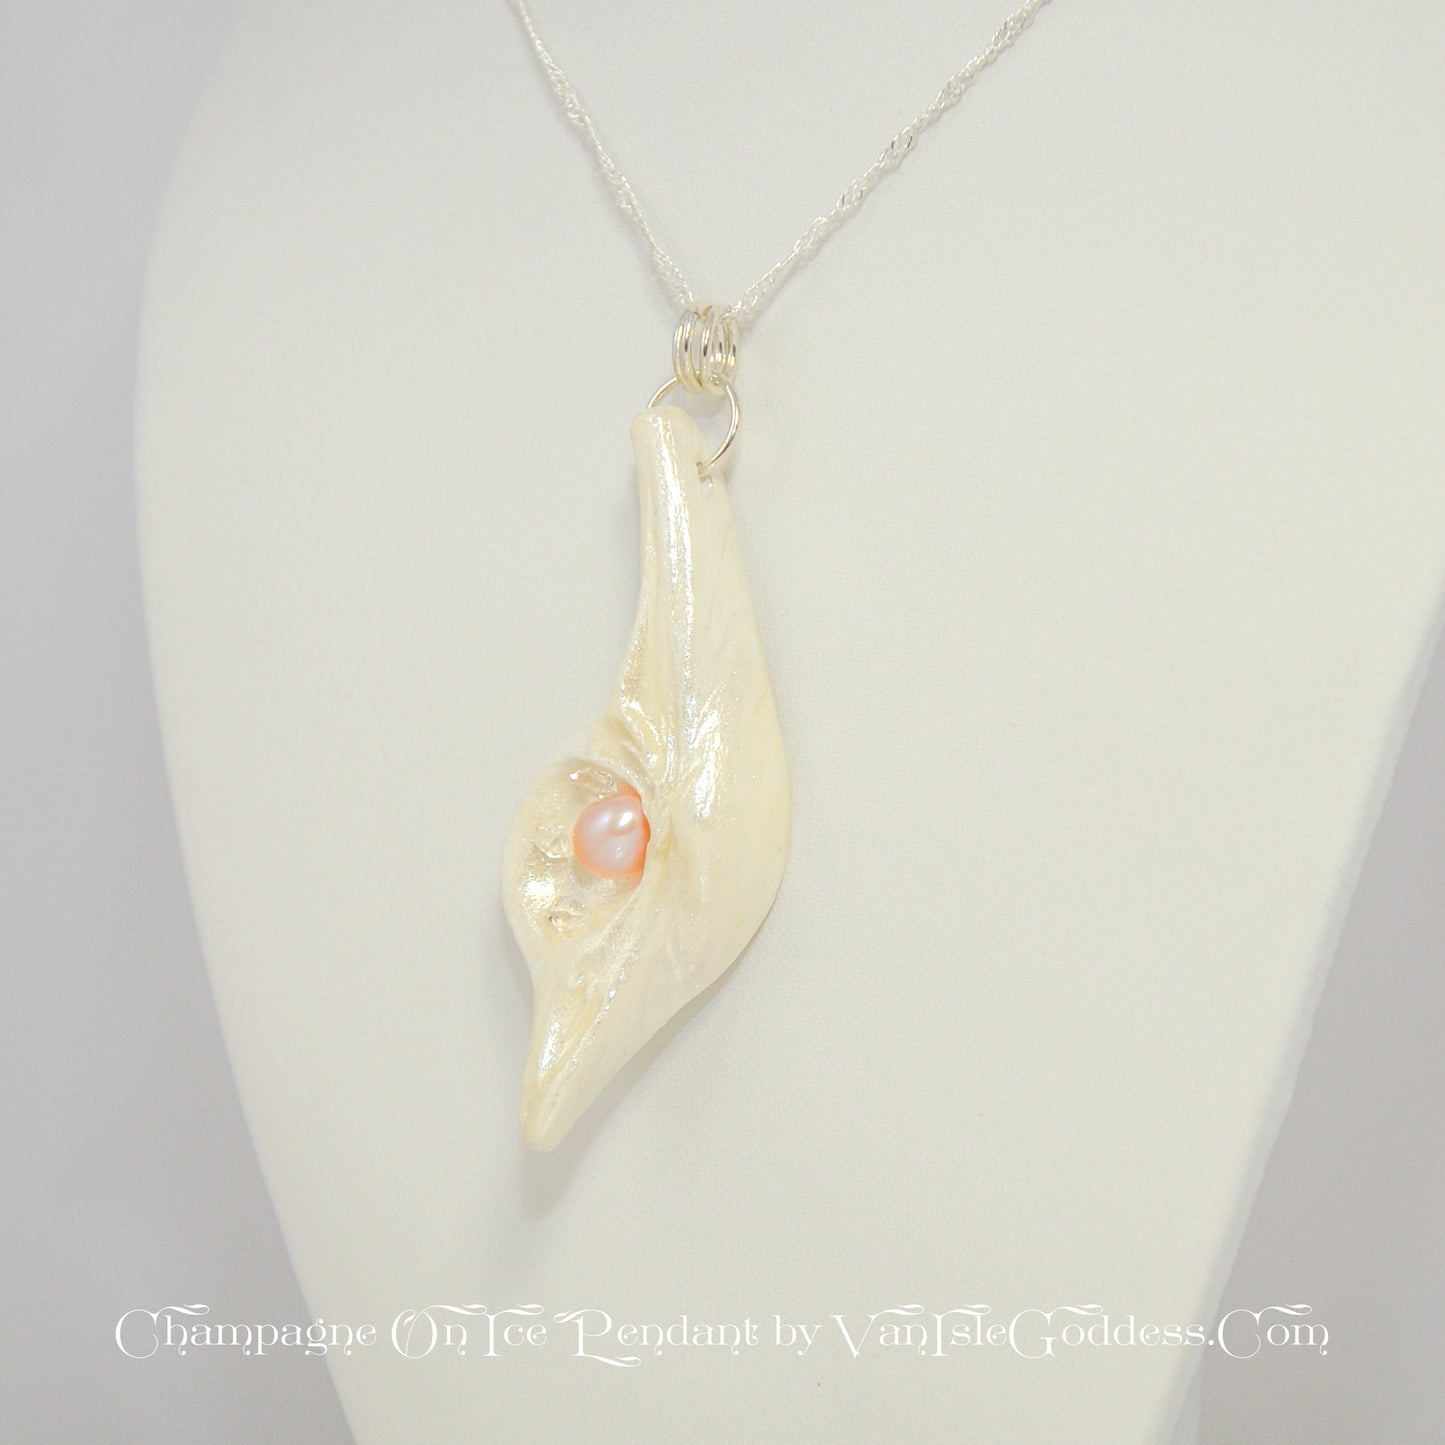 The Champagne on Ice pendant is shown hanging from a necklace.  The pendant is slightly turned to show the left side of the pendant. The print on the bottom of the image says: champagne on ice pendant by van isle goddess dot com